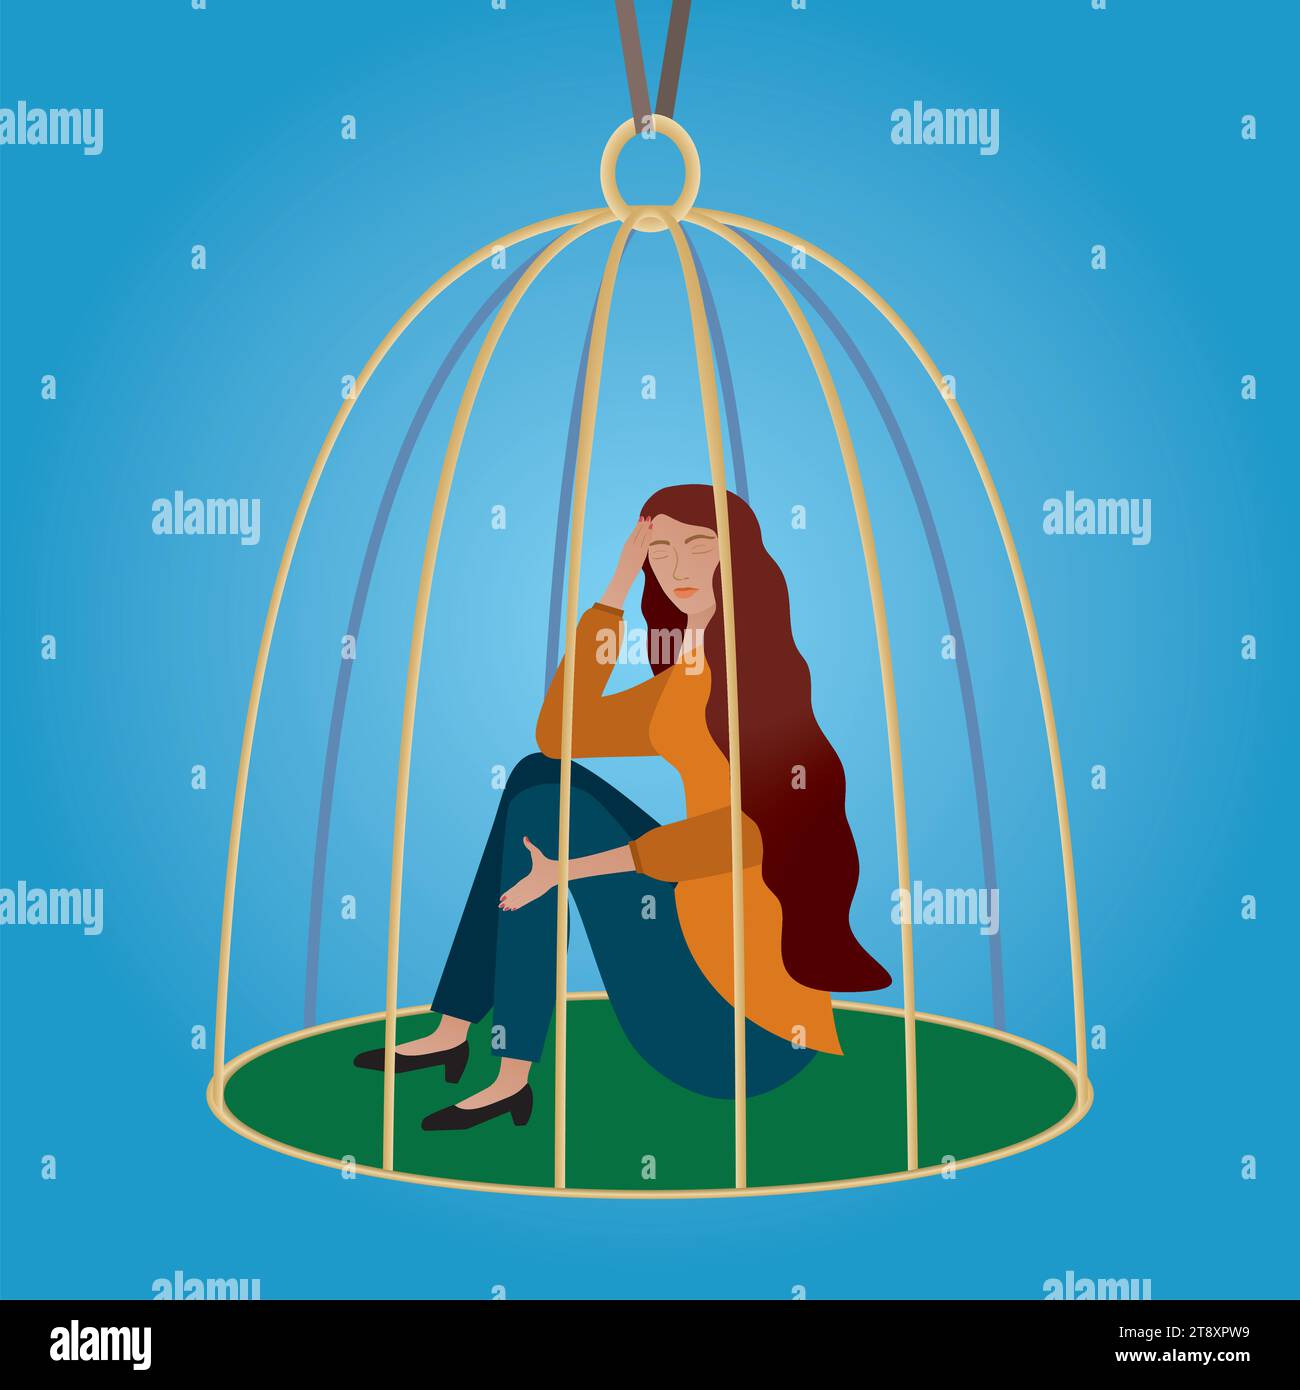 Sad and lonely woman trapped in birdcage. Square composition. Vector illustration. Stock Vector